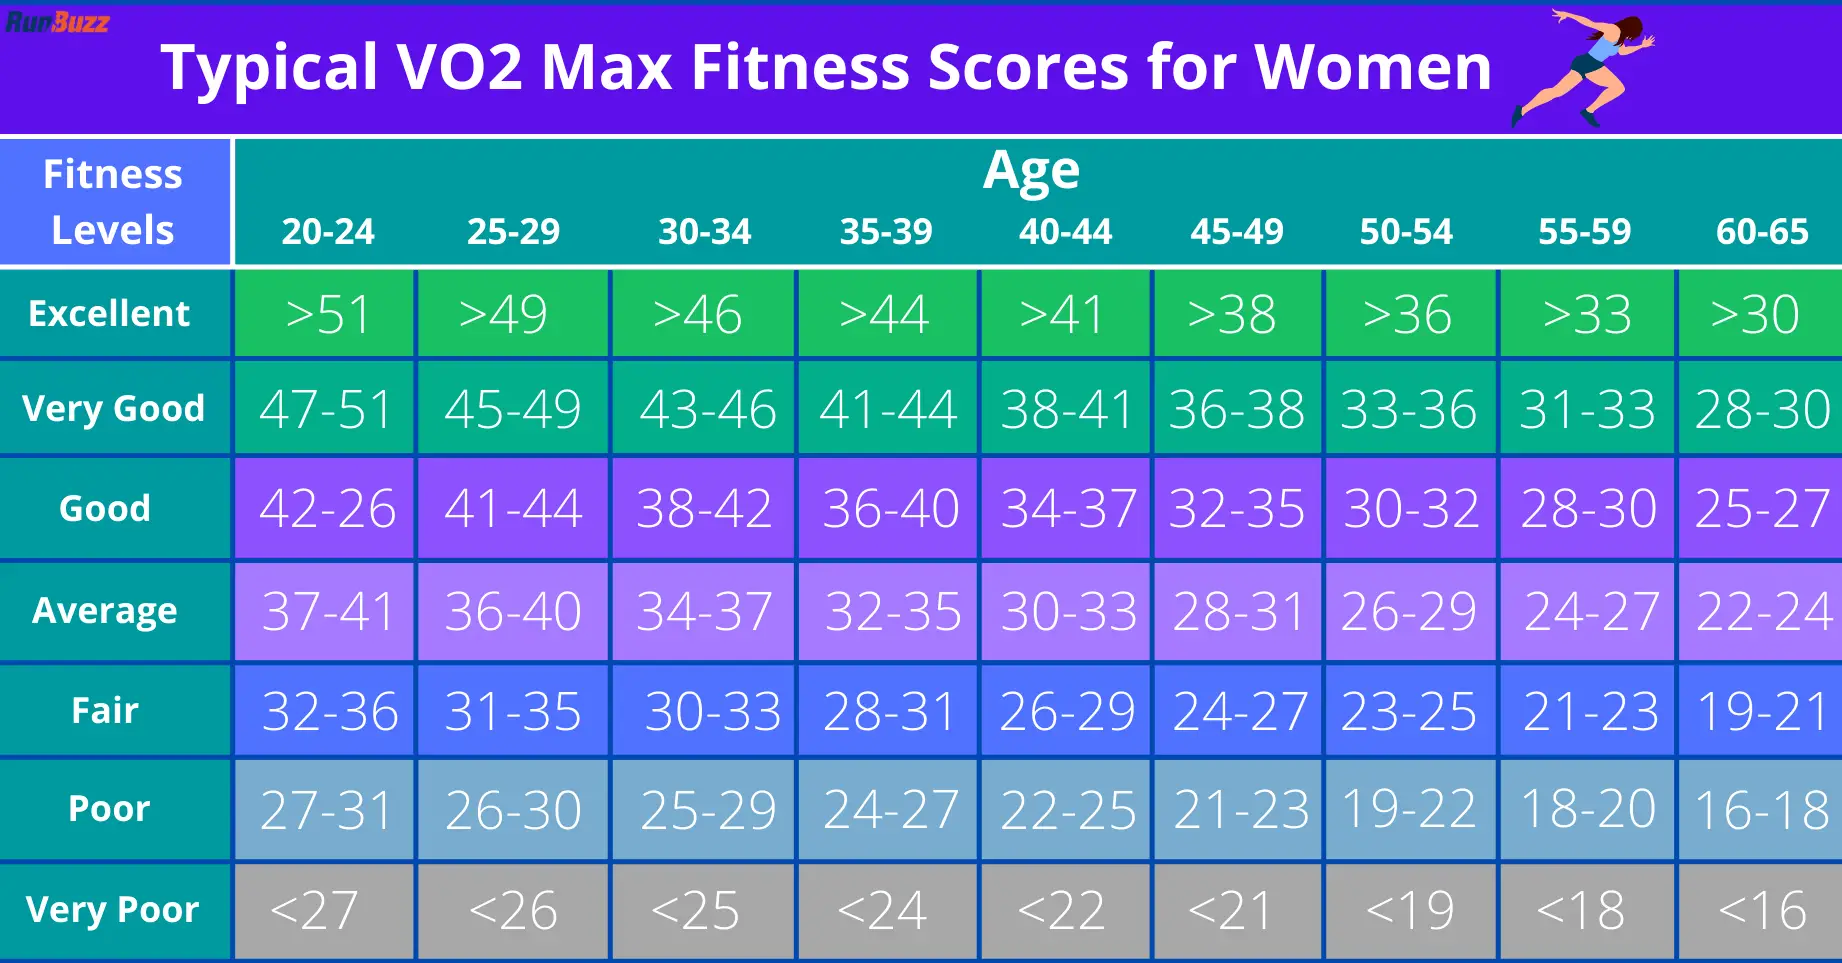 Typical VO2 Max Fitness Scores for Women